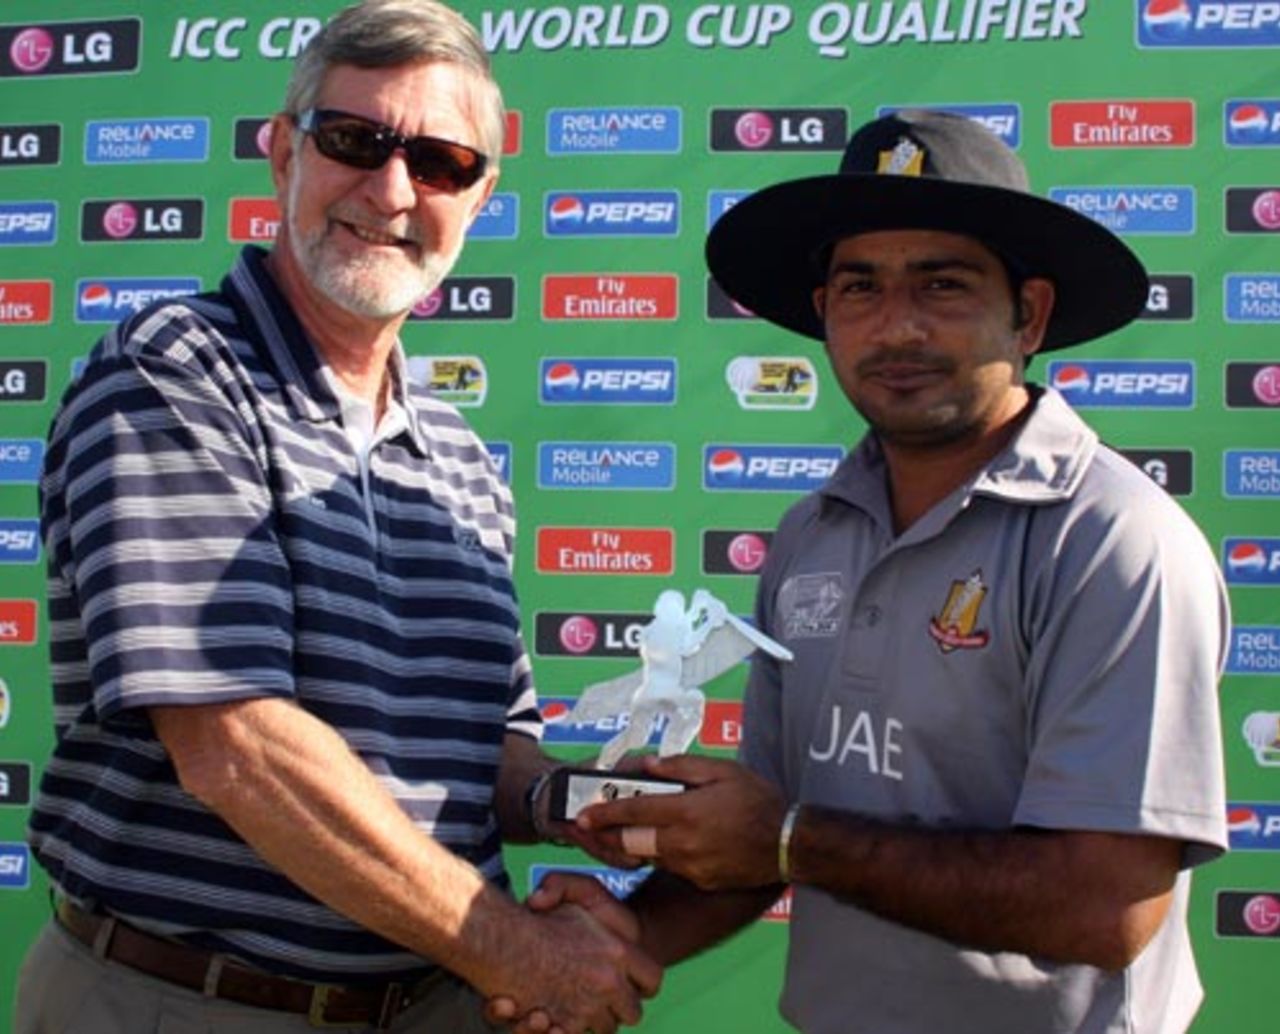 UAE's Fayyaz Ahmed collects his Man-of-the-Match award, Ireland v UAE, ICC World Cup Qualifiers, Super Eights, Johannesburg, April 13, 2009